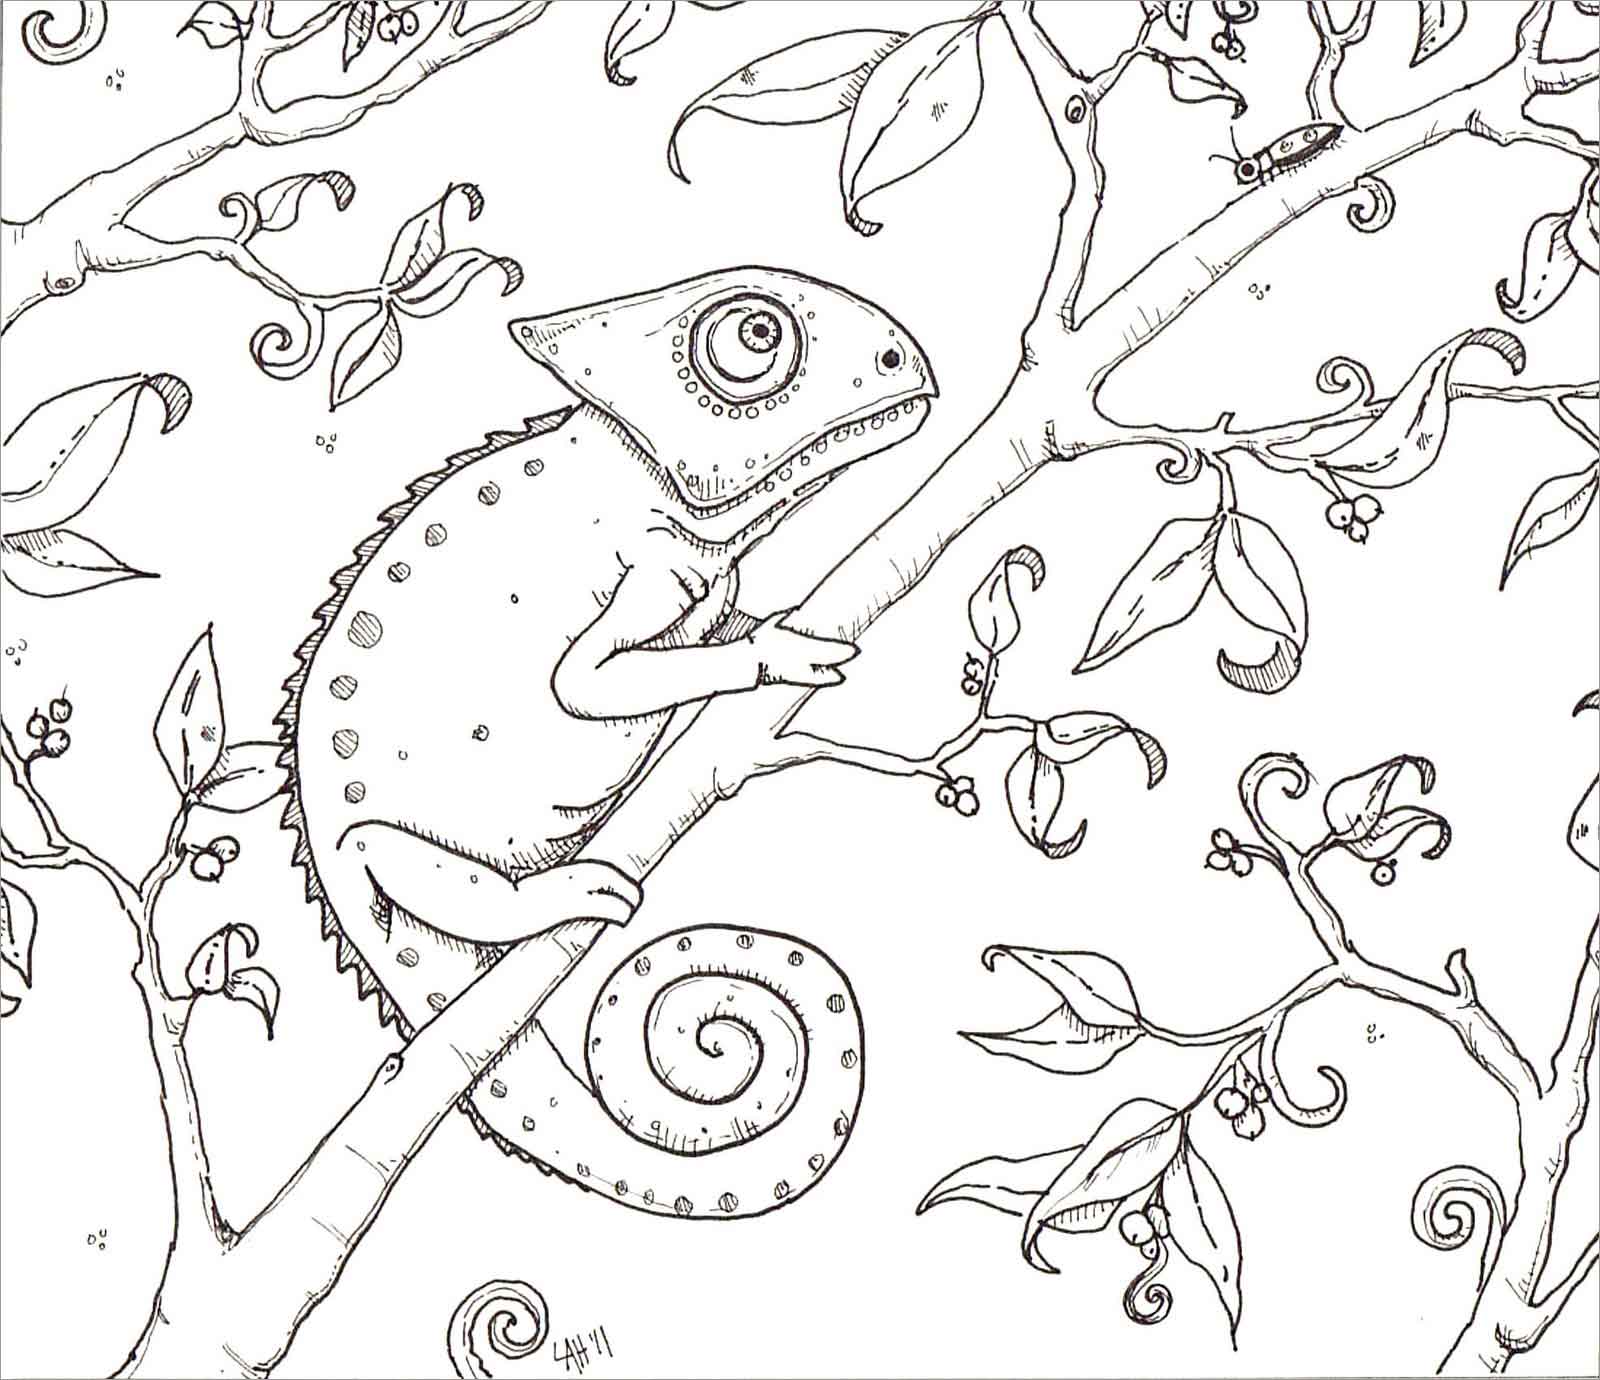 Chameleon Lives on Tree Coloring Page